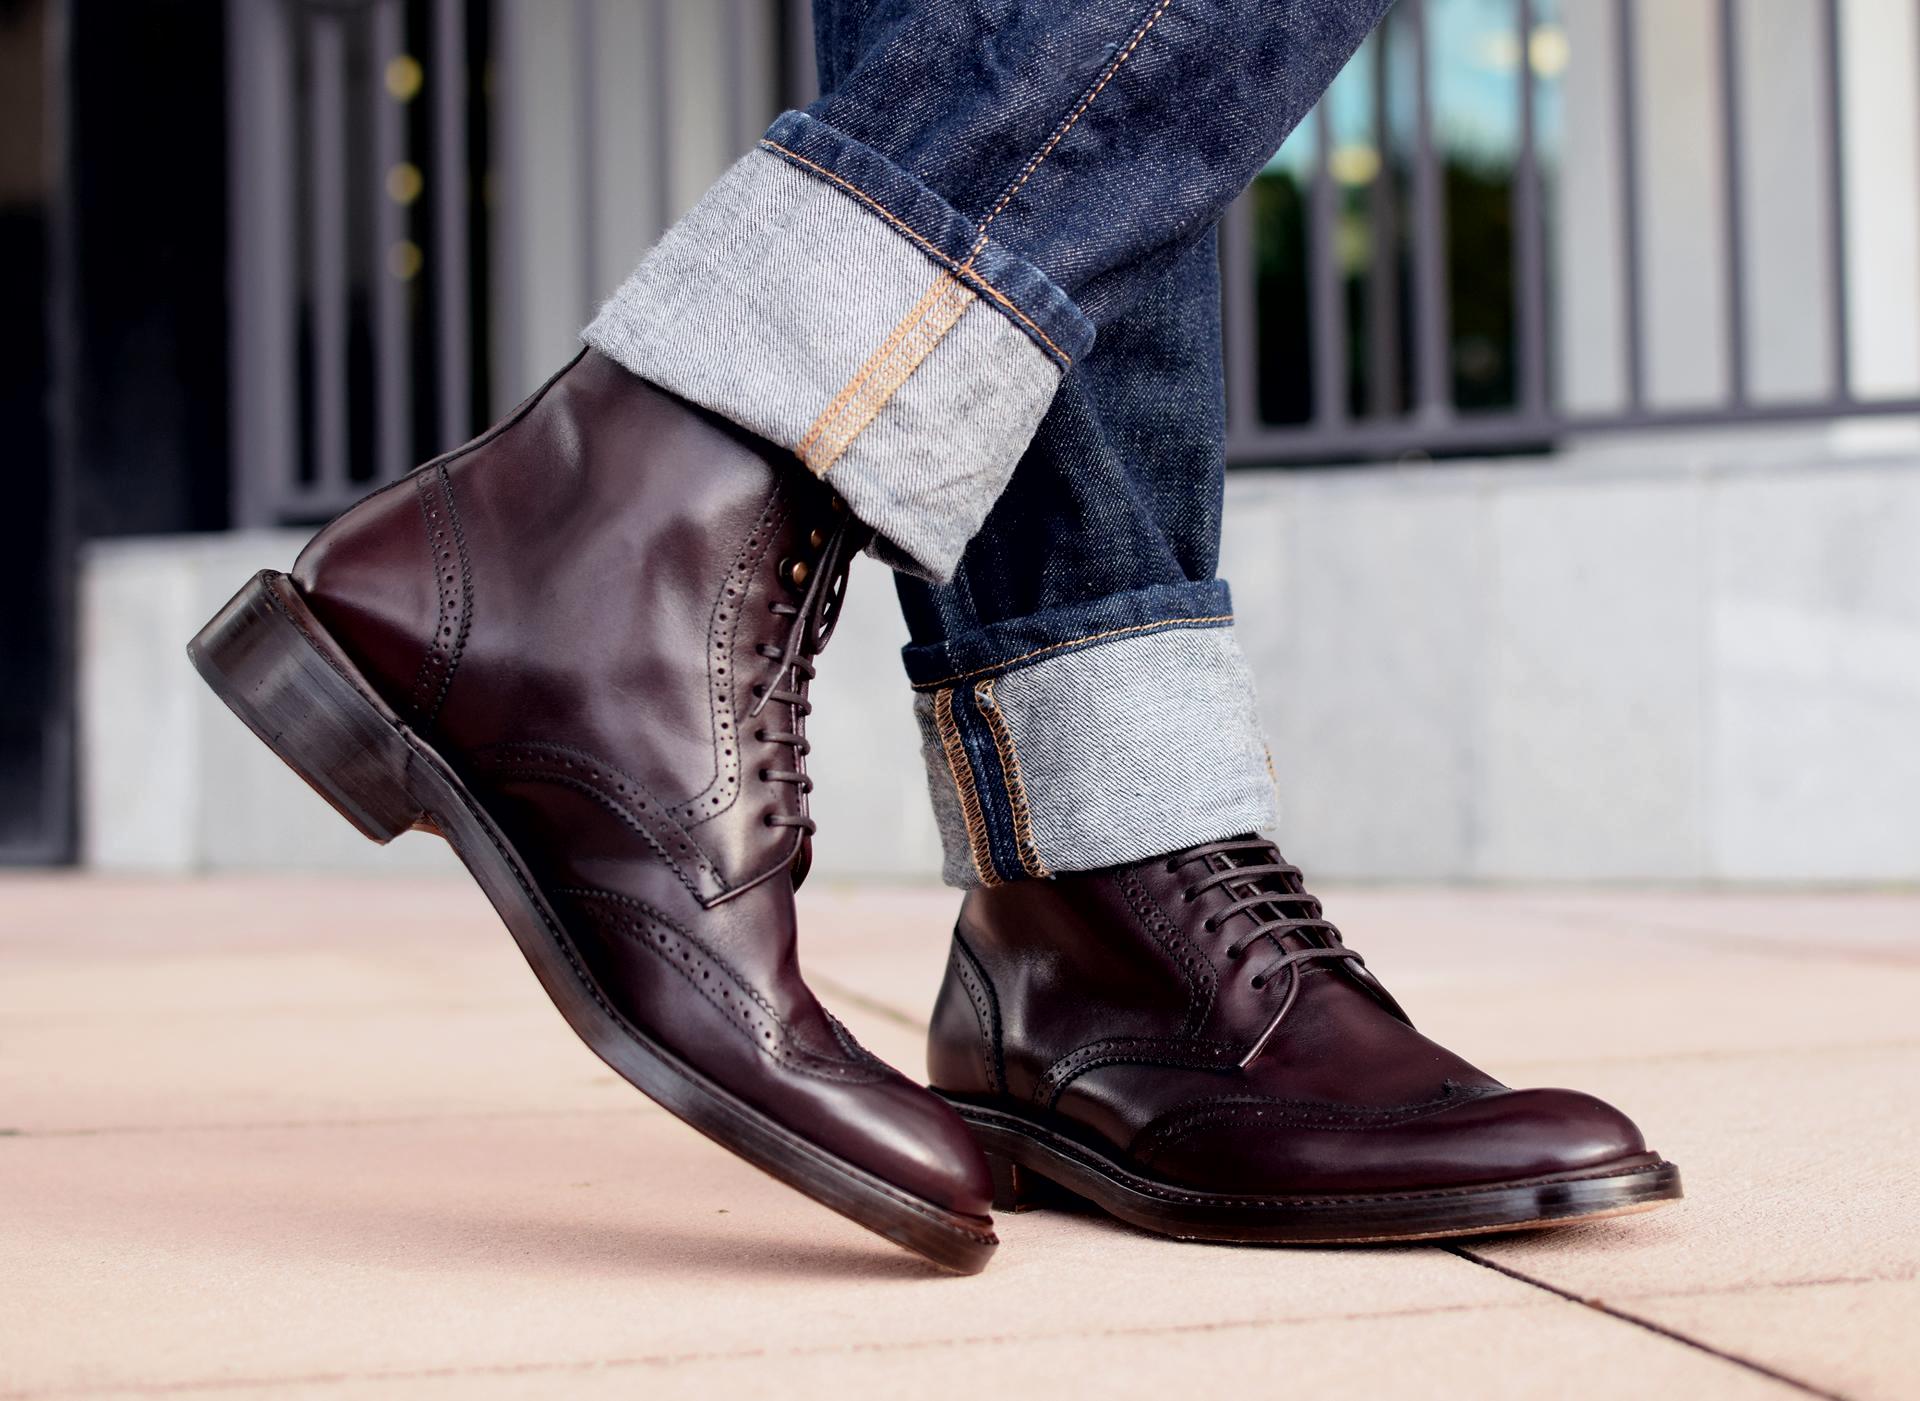 Cordovan Color for Burgundy Shoes? | Page 2 | Styleforum